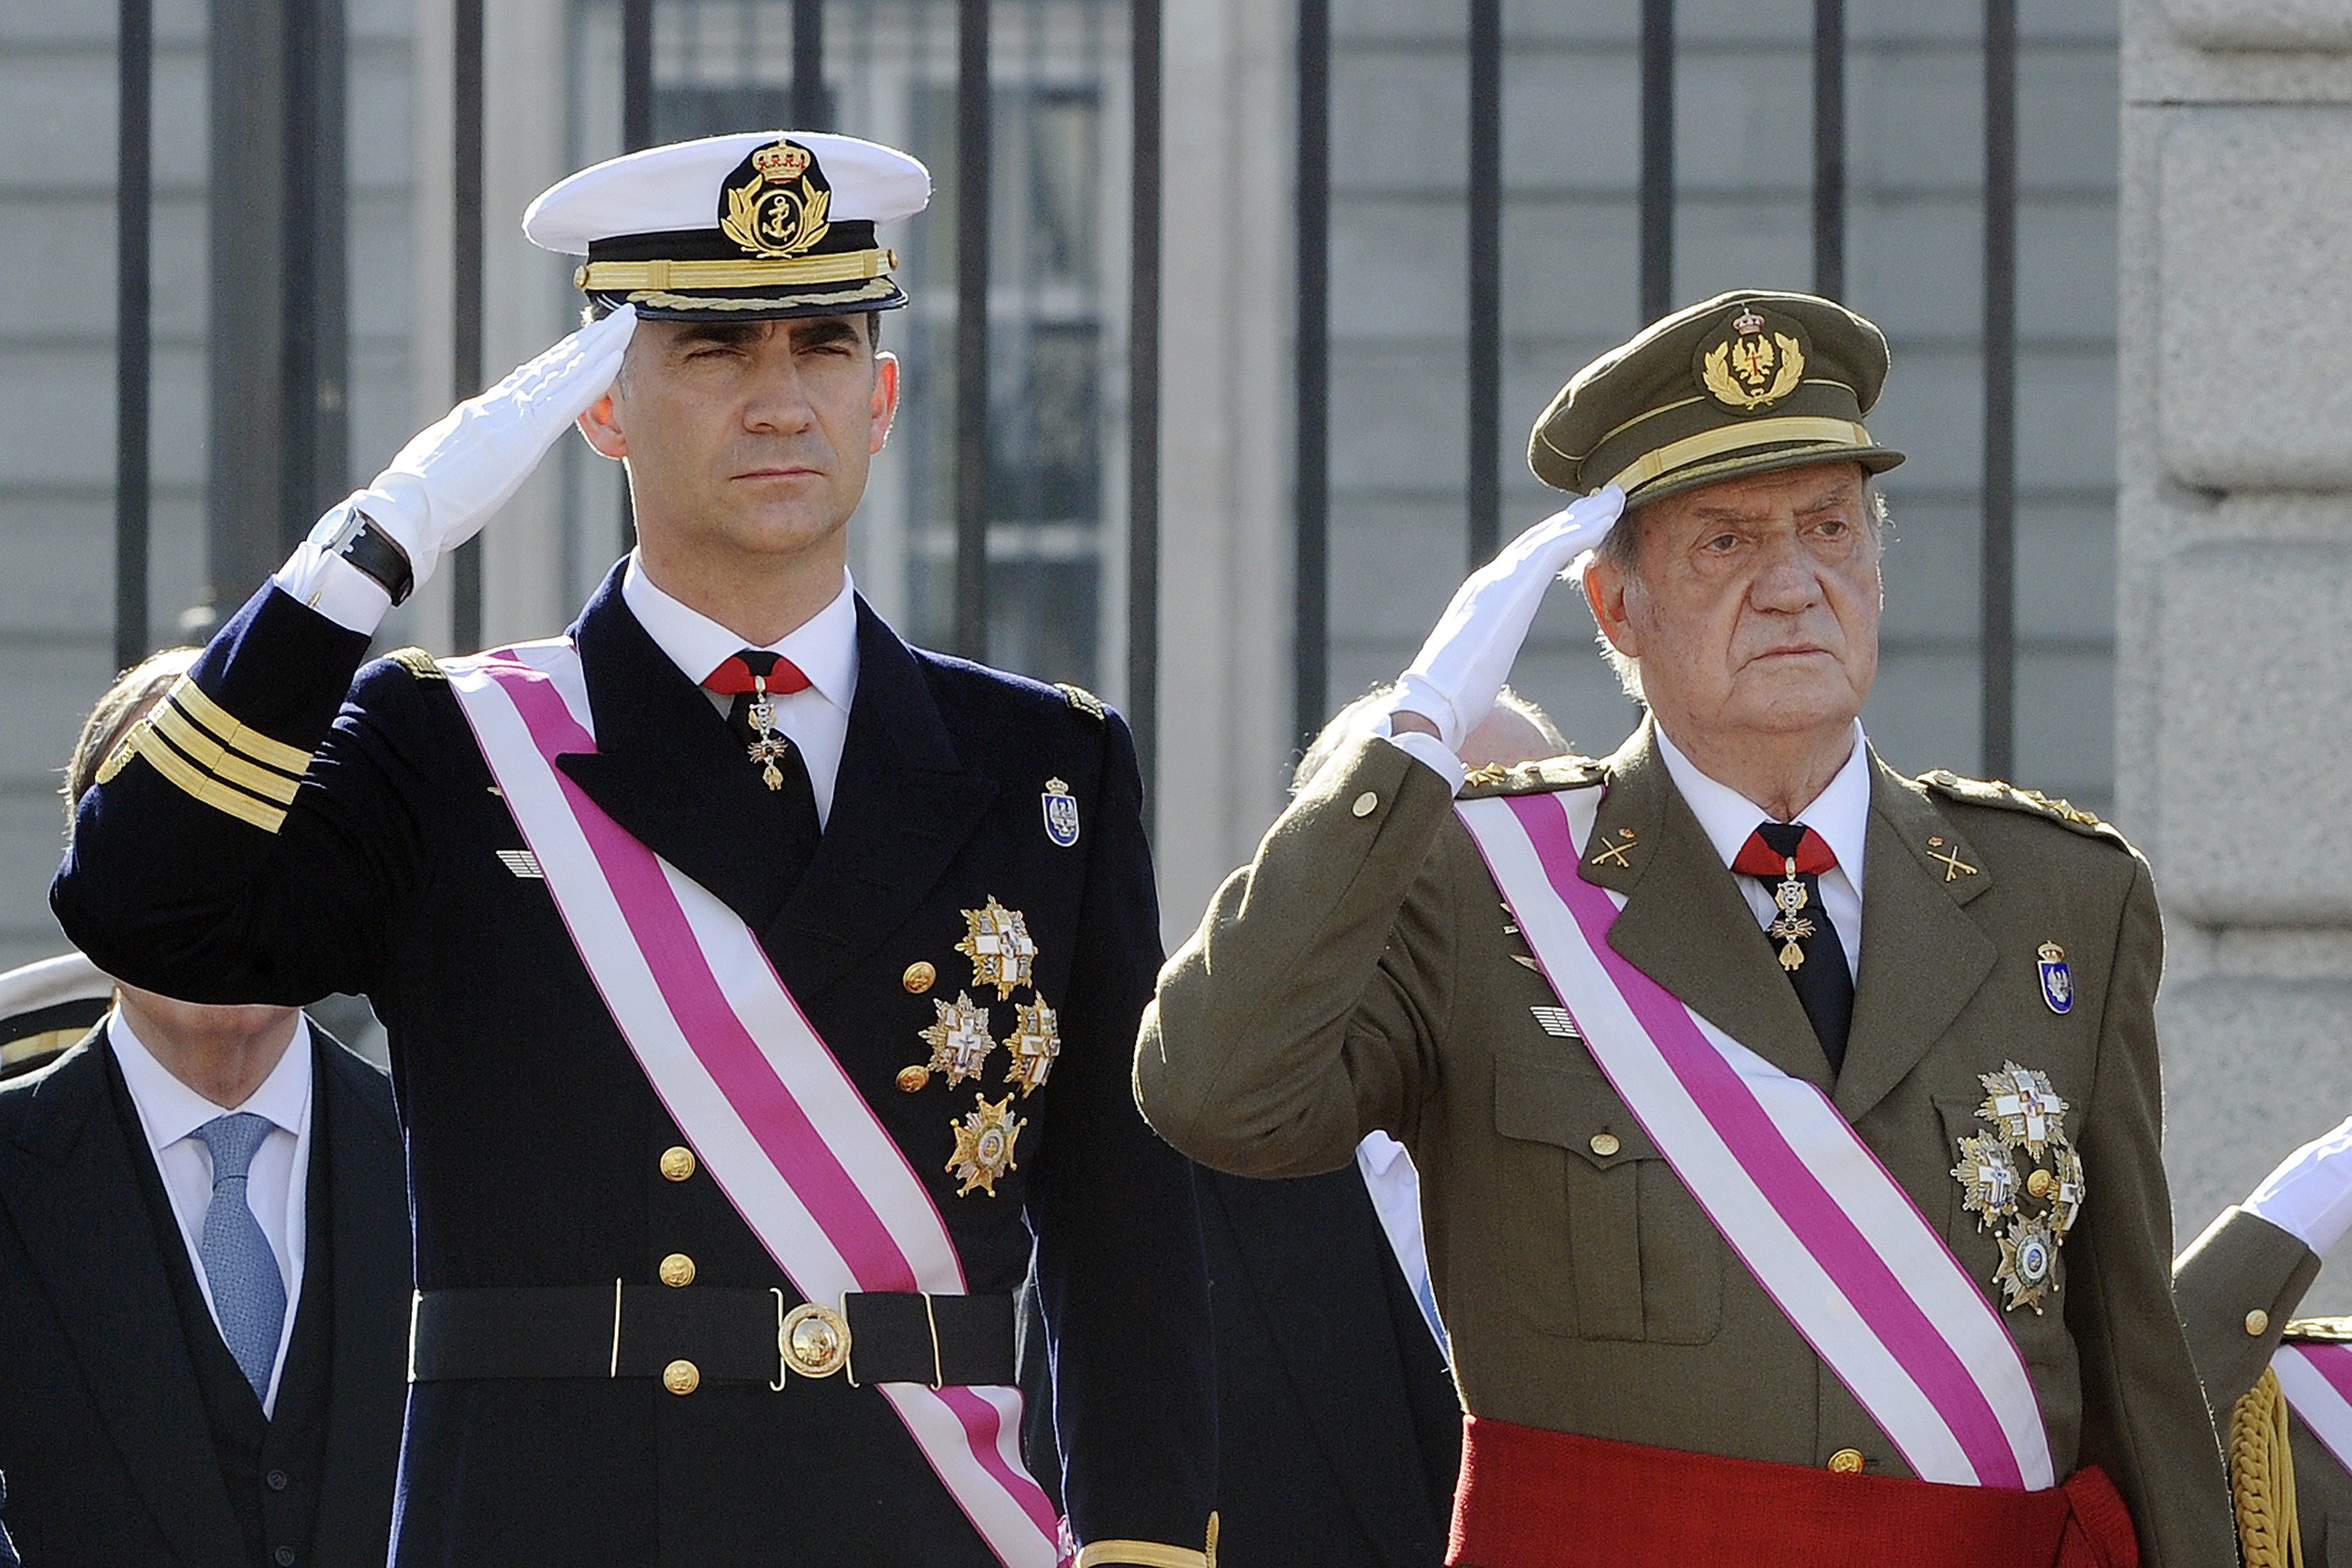 Spain's Crown Prince Felipe and Spain's King Juan Carlos salute Spain's Queen Sofia during the Pascua Militar ceremony at the Royal Palace in Madrid on January 6, 2014. (Dominique Faget—AFP/Getty Images)